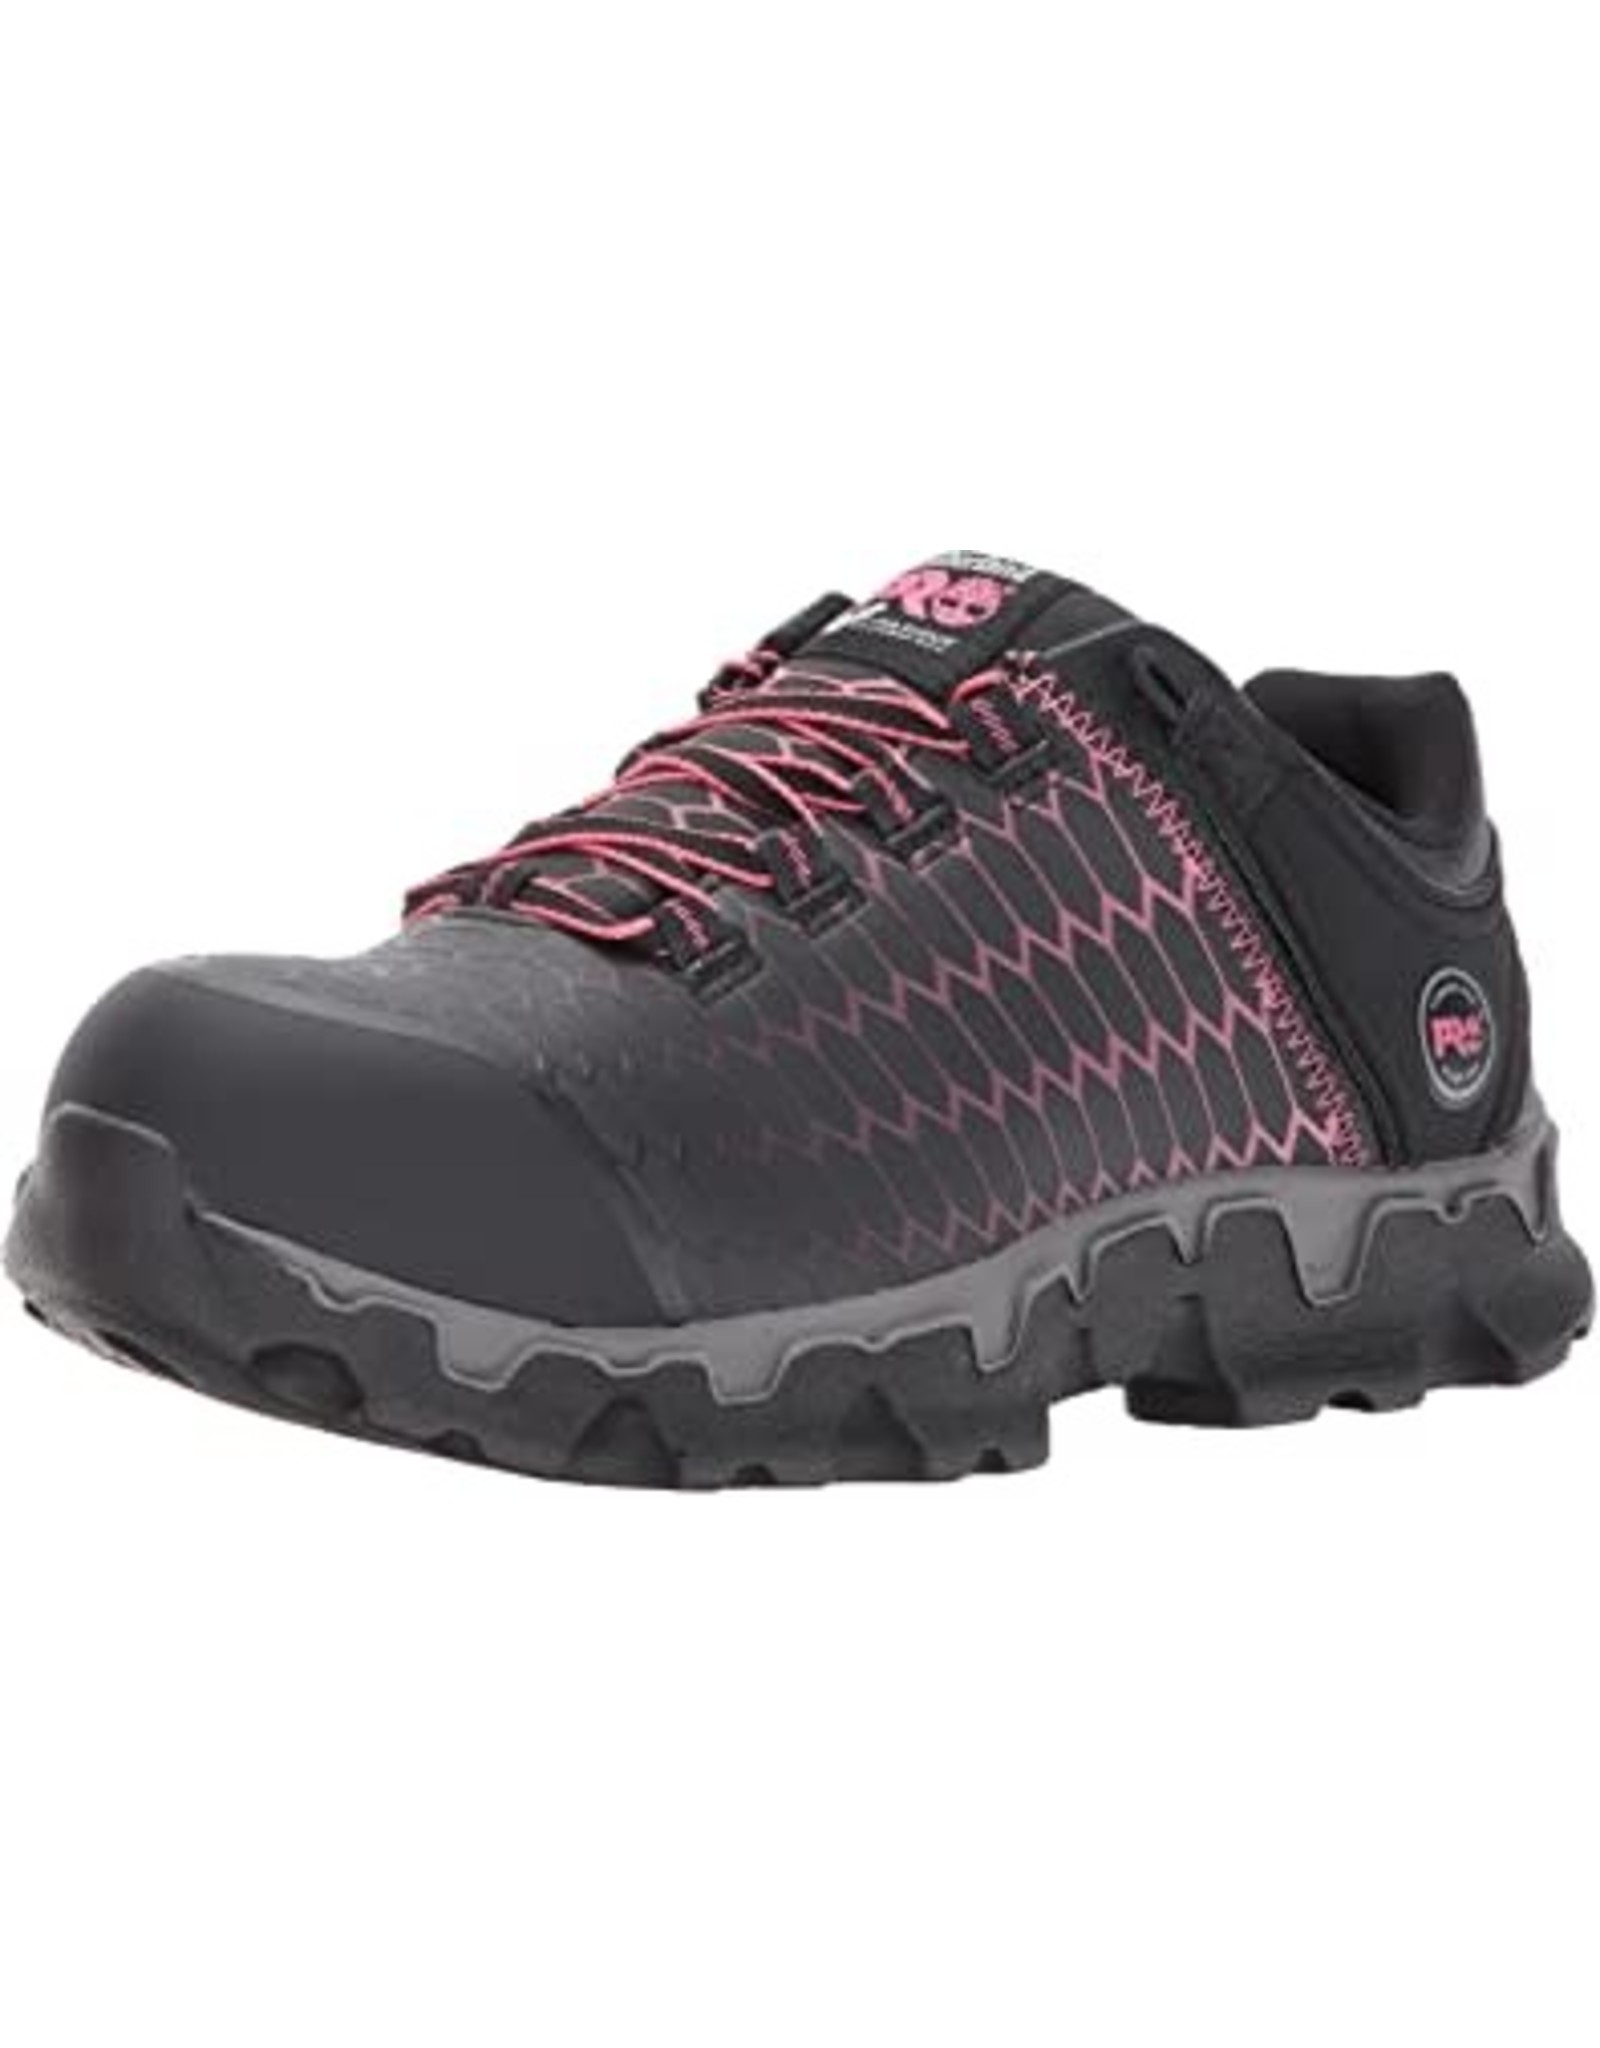 Timberland Ladies PowerTrain Sport 0A1I5Q Alloy Safety Toe Work Shoes